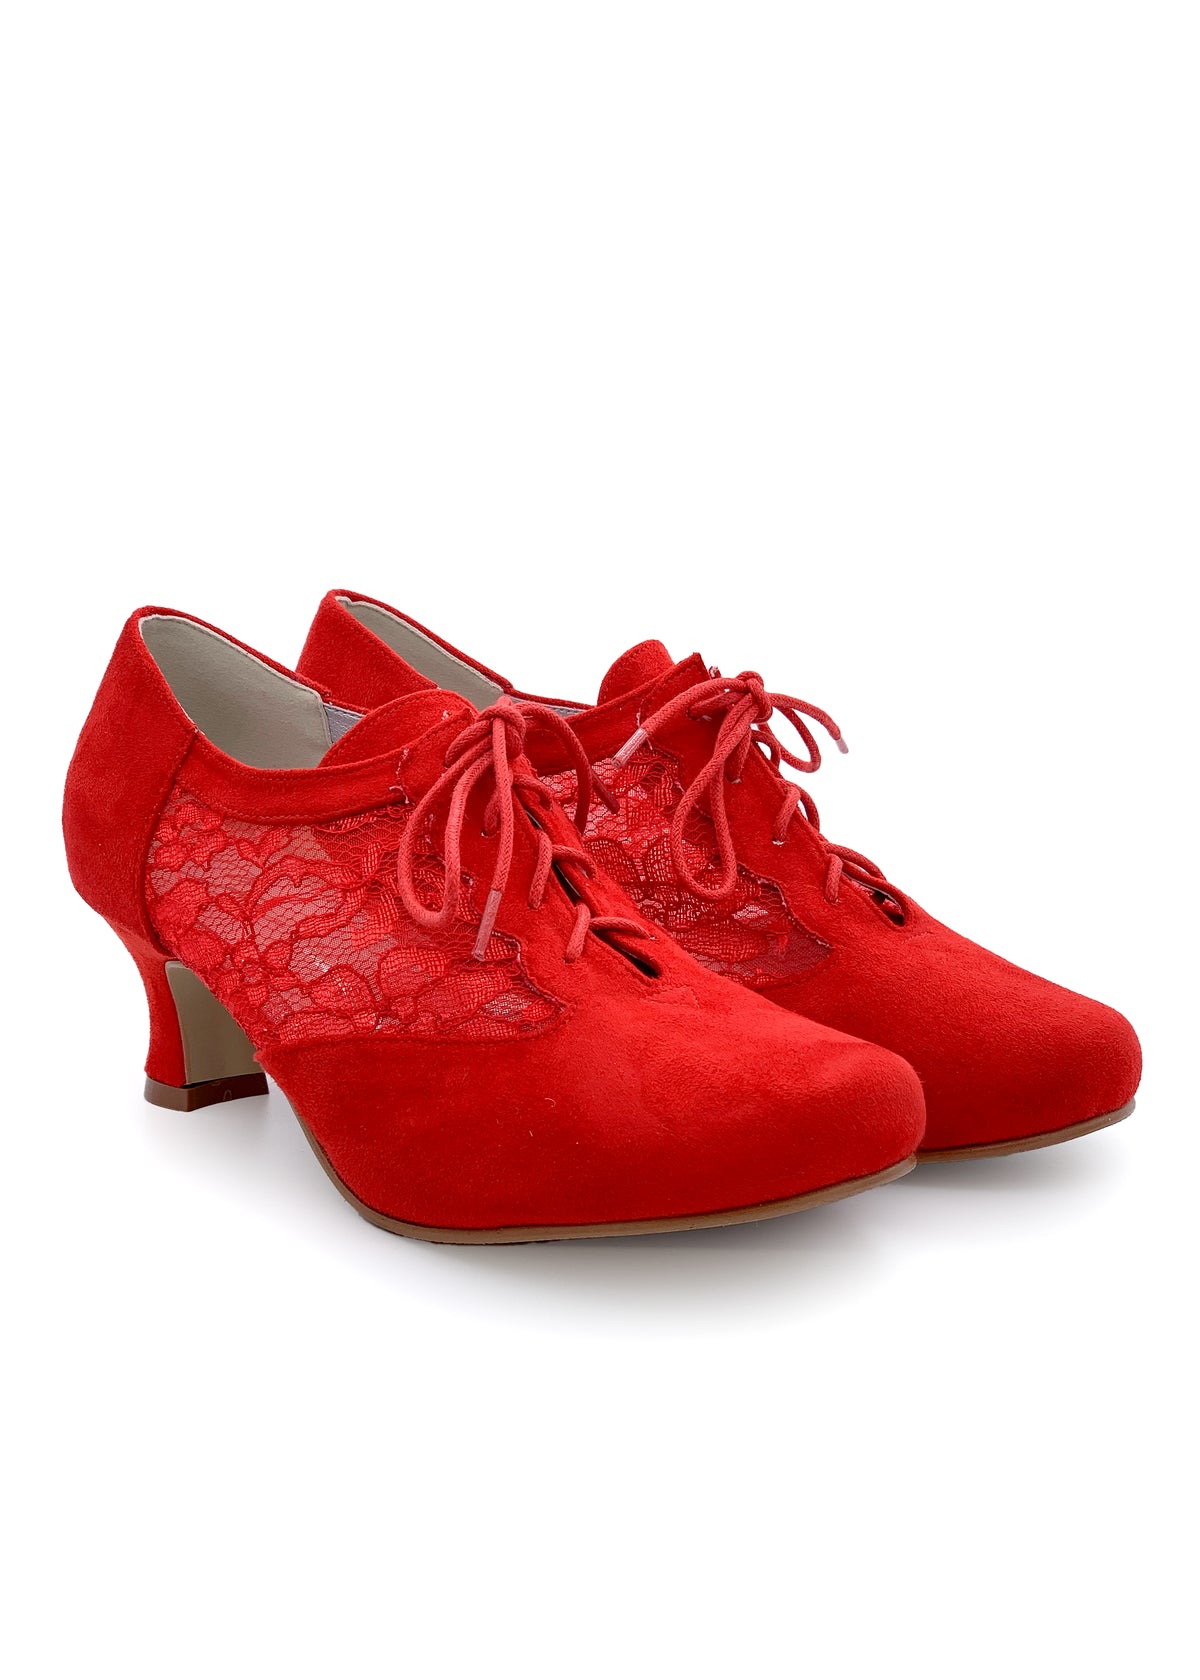 Party Walking shoes - red fabric, lace on the sides, wide sole